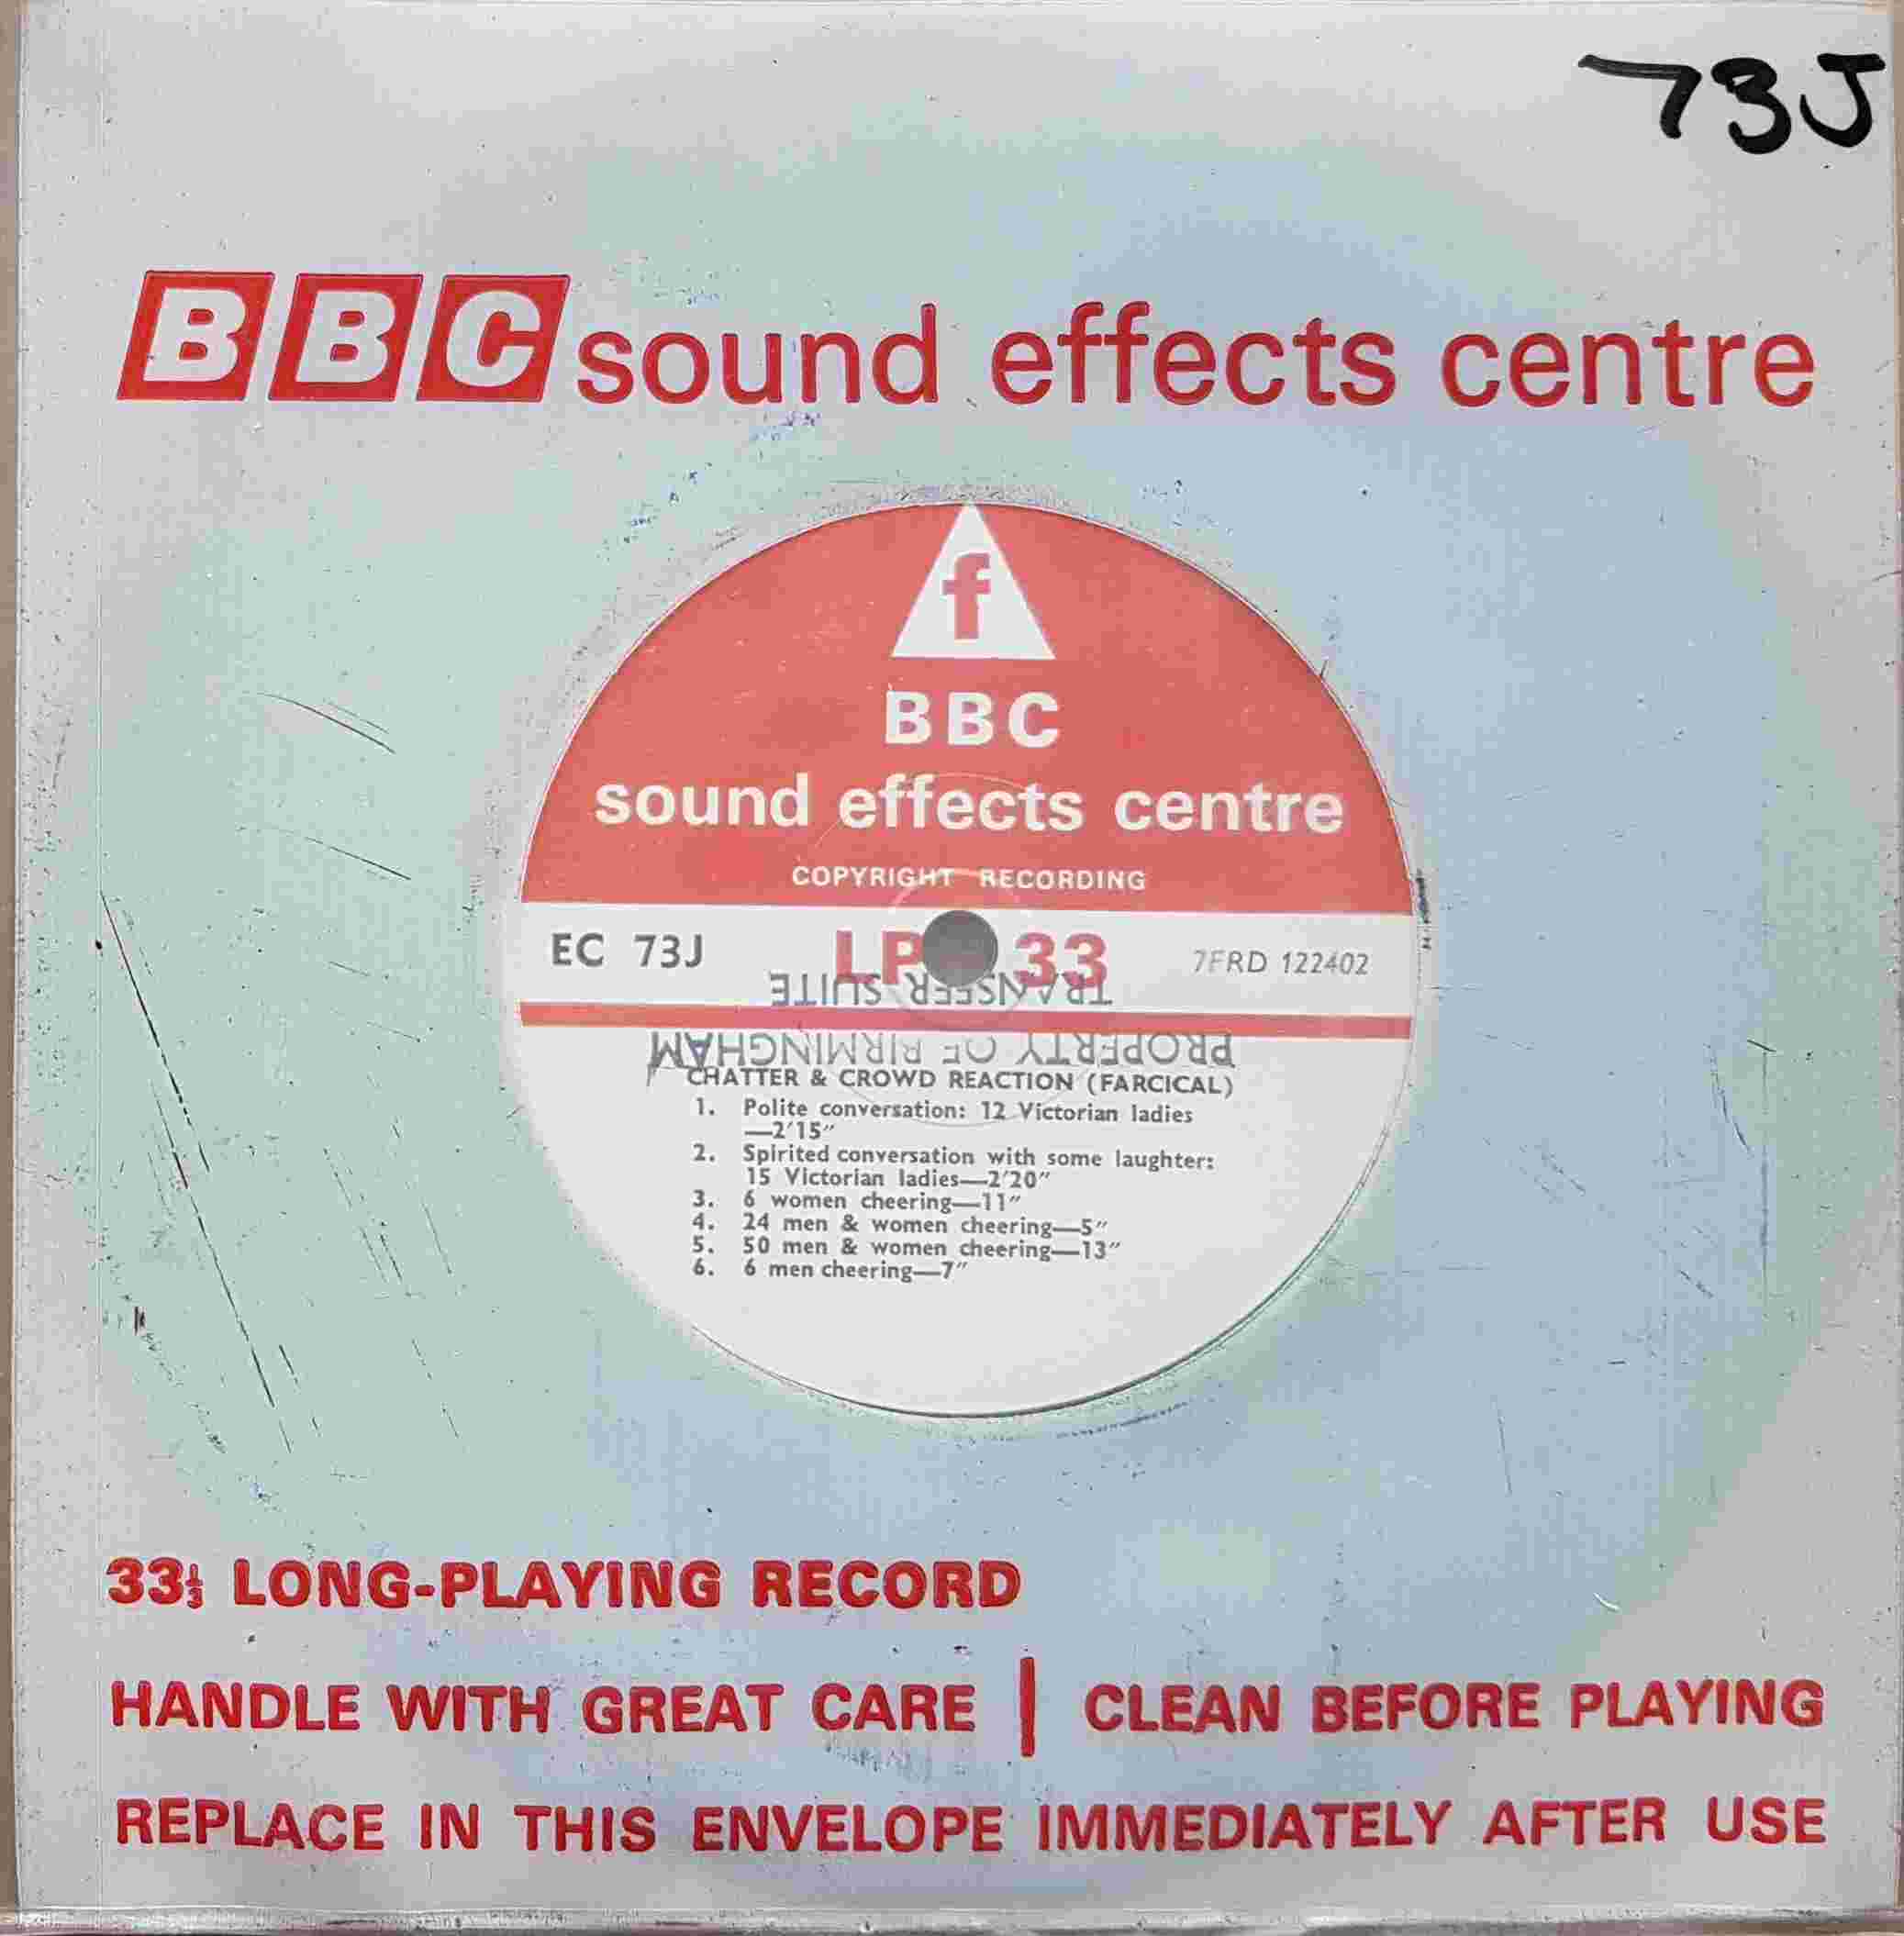 Picture of EC 73J Chatter & crowd reaction (farcical) by artist Not registered from the BBC singles - Records and Tapes library